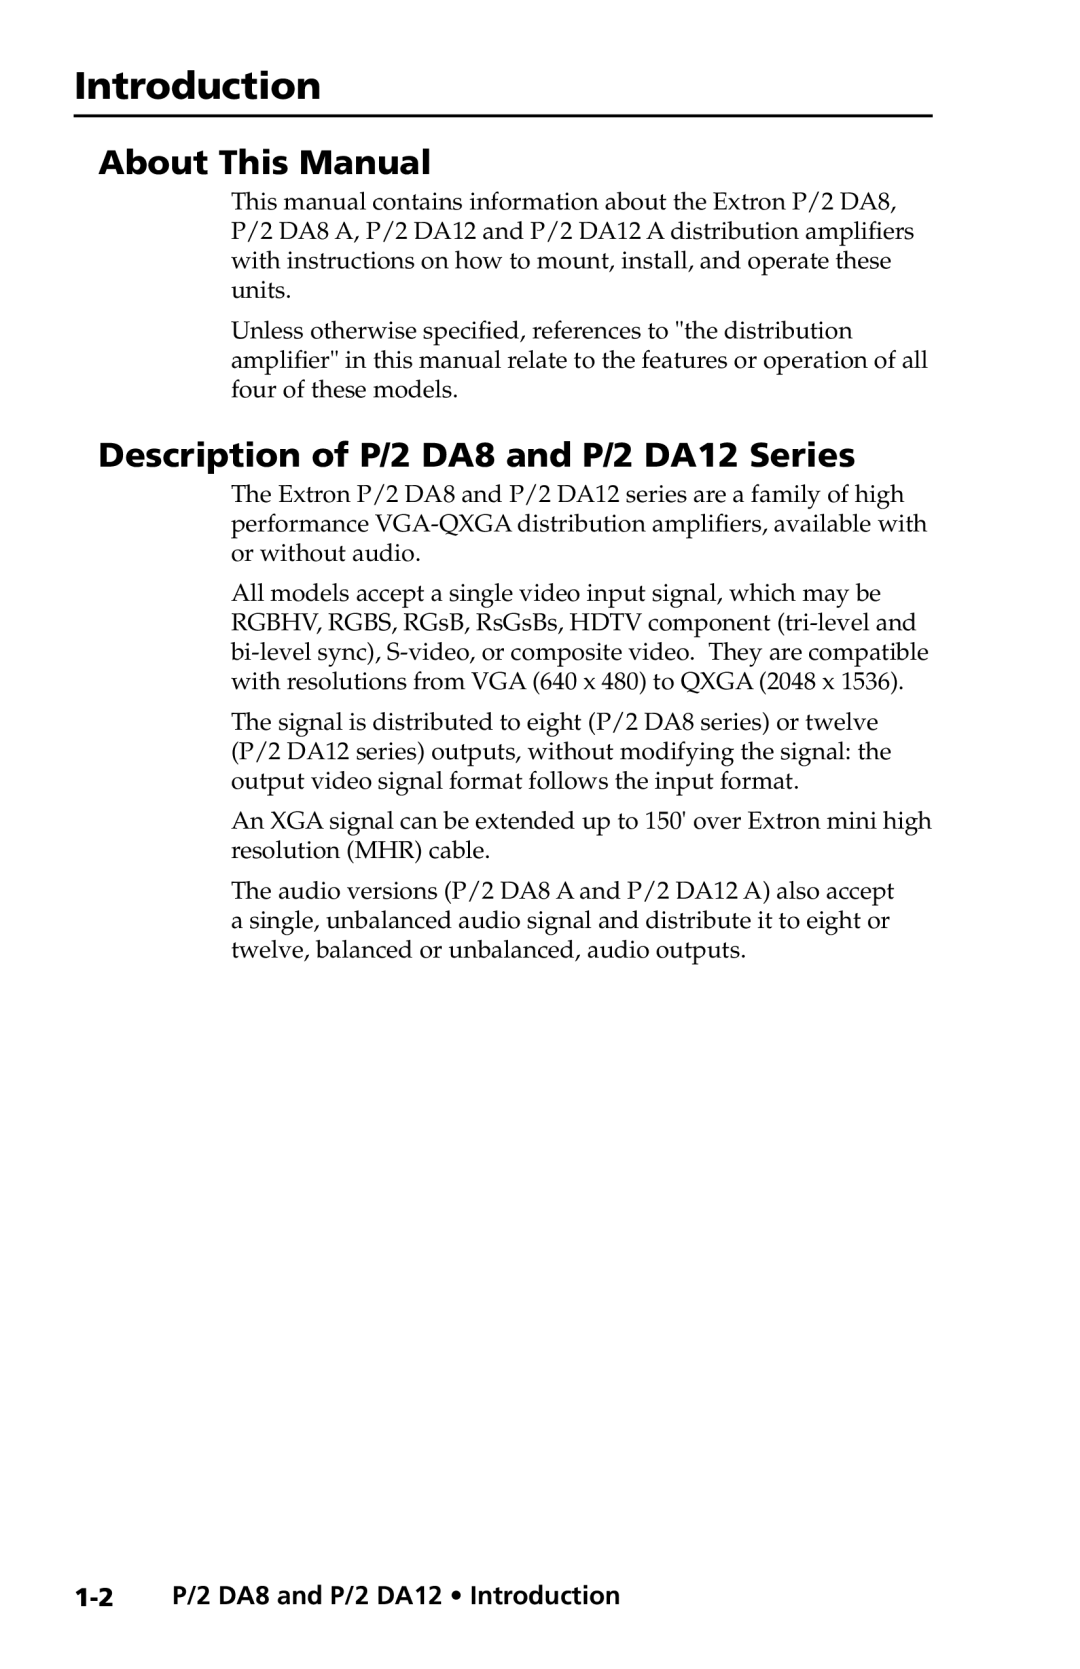 Extron electronic user manual Introduction, About This Manual, Description of P/2 DA8 and P/2 DA12 Series 